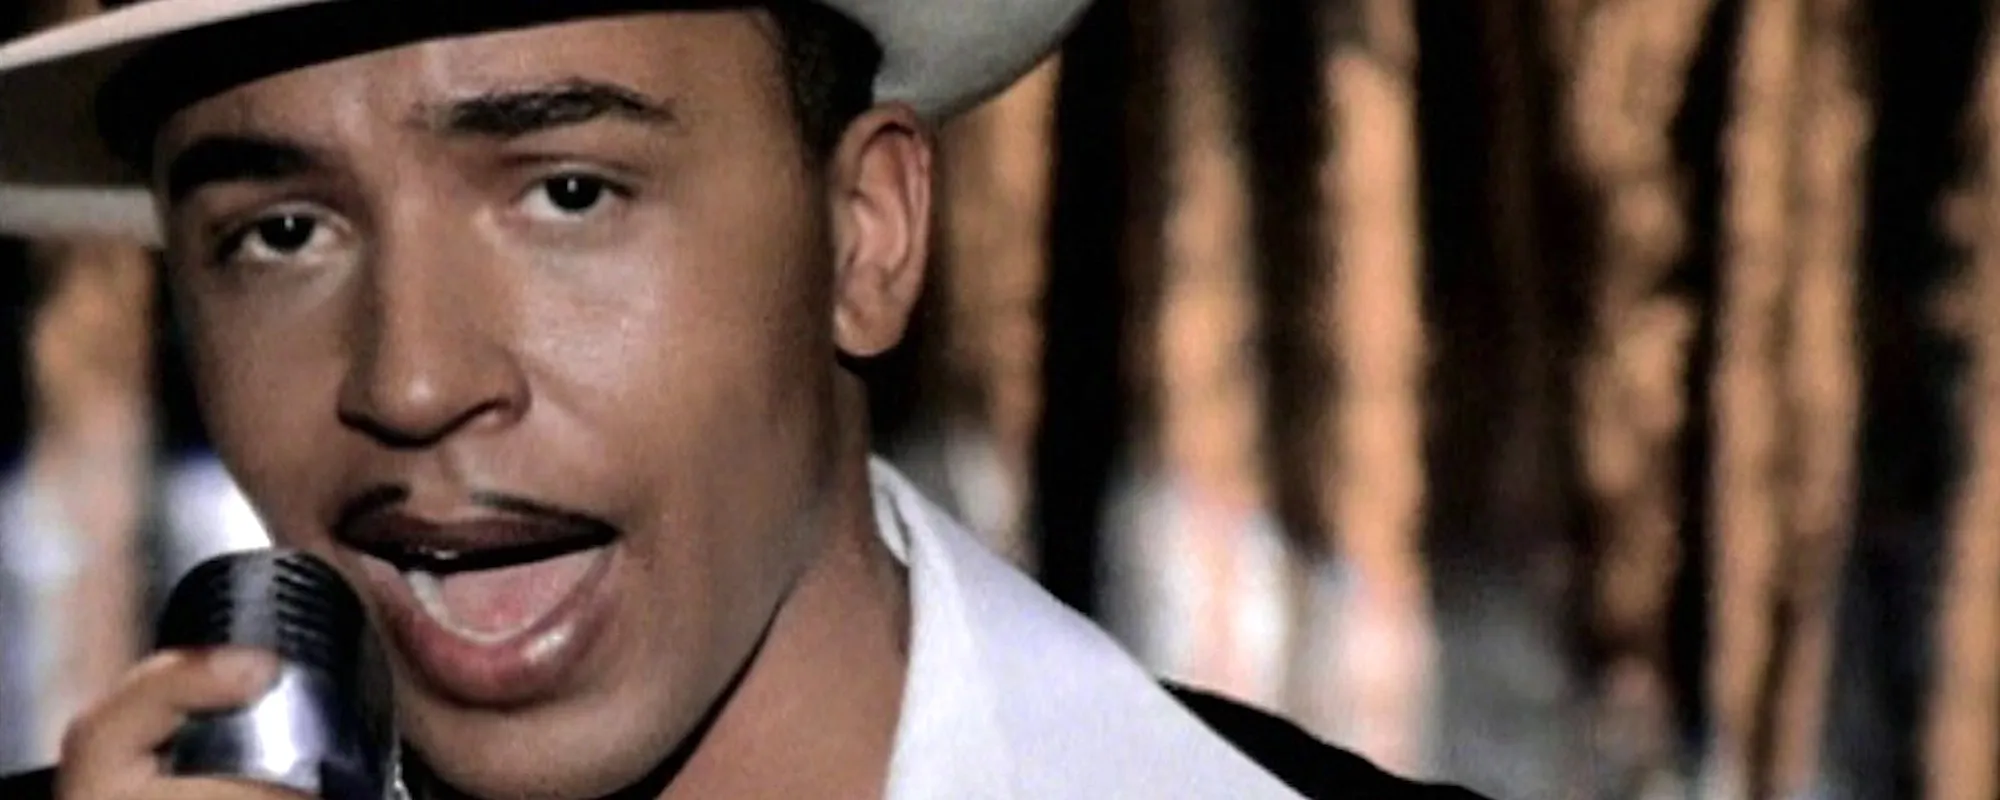 The Cuban-German Roots and Meaning Behind Lou Bega’s 1999 Dance Hit “Mambo No. 5 (A Little Bit Of)”